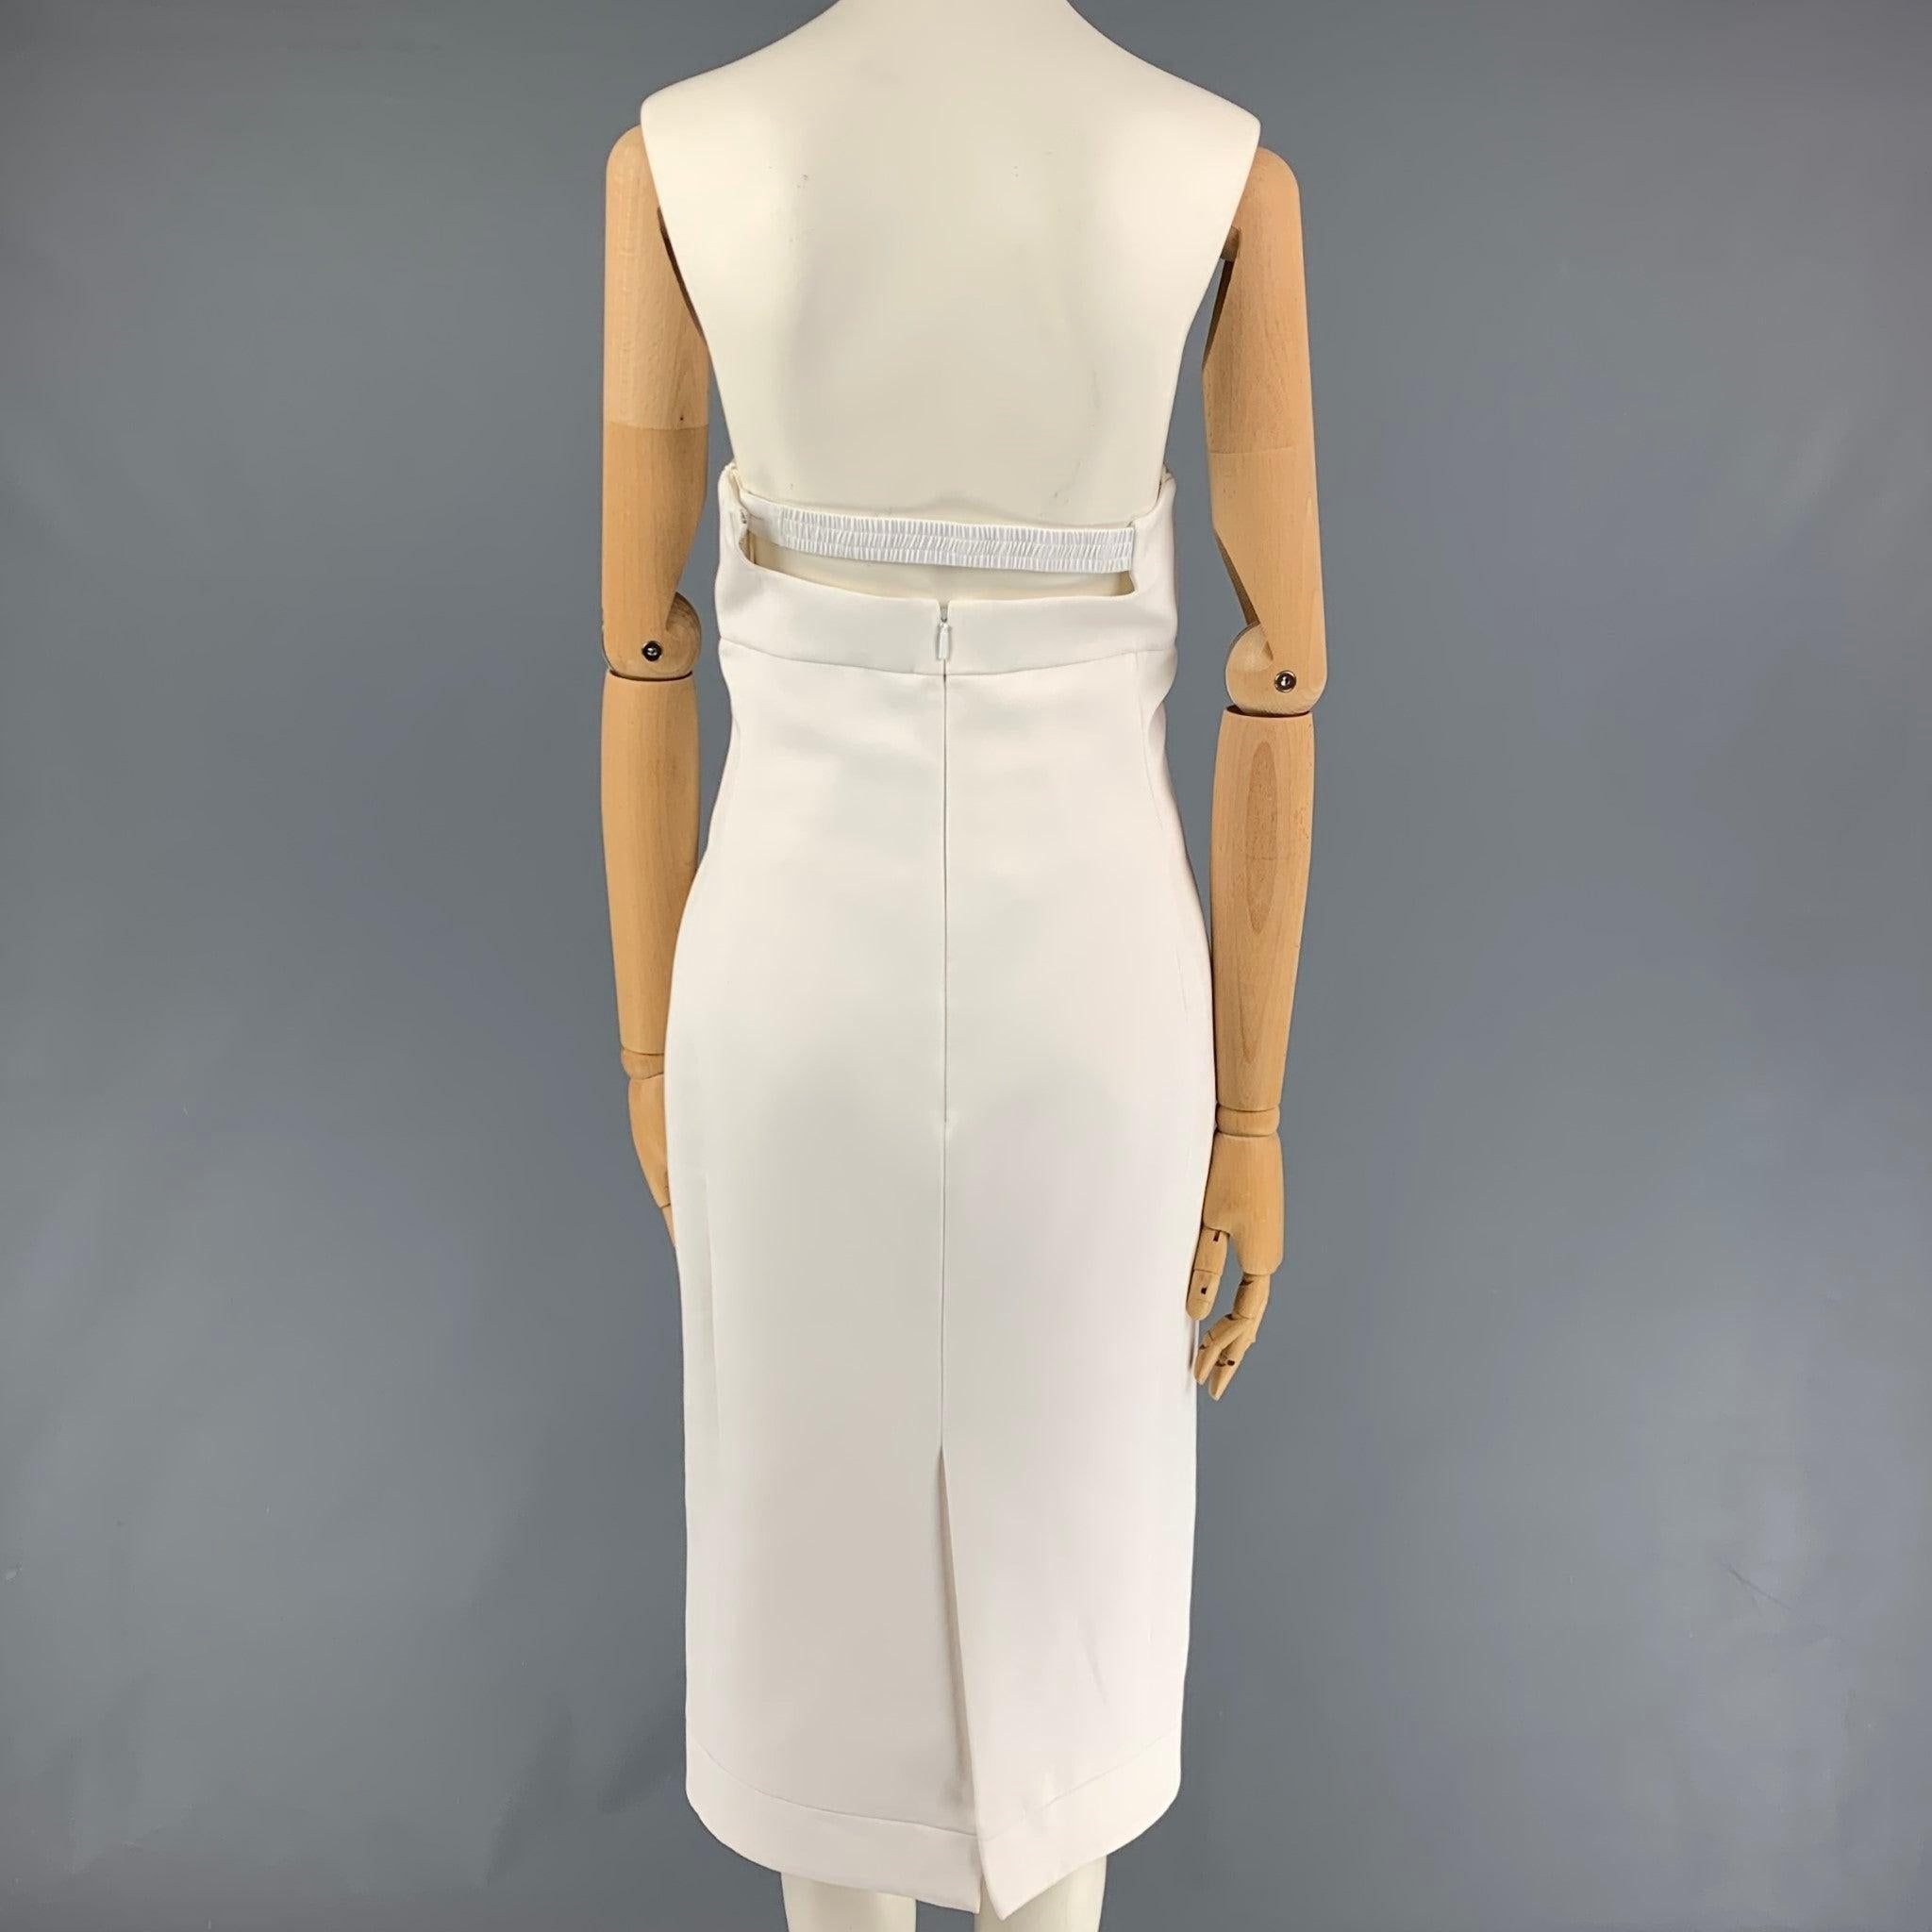 SAINT LAURENT Size 2 White Viscose Strapless Cut-Out Cocktail Dress In Good Condition For Sale In San Francisco, CA